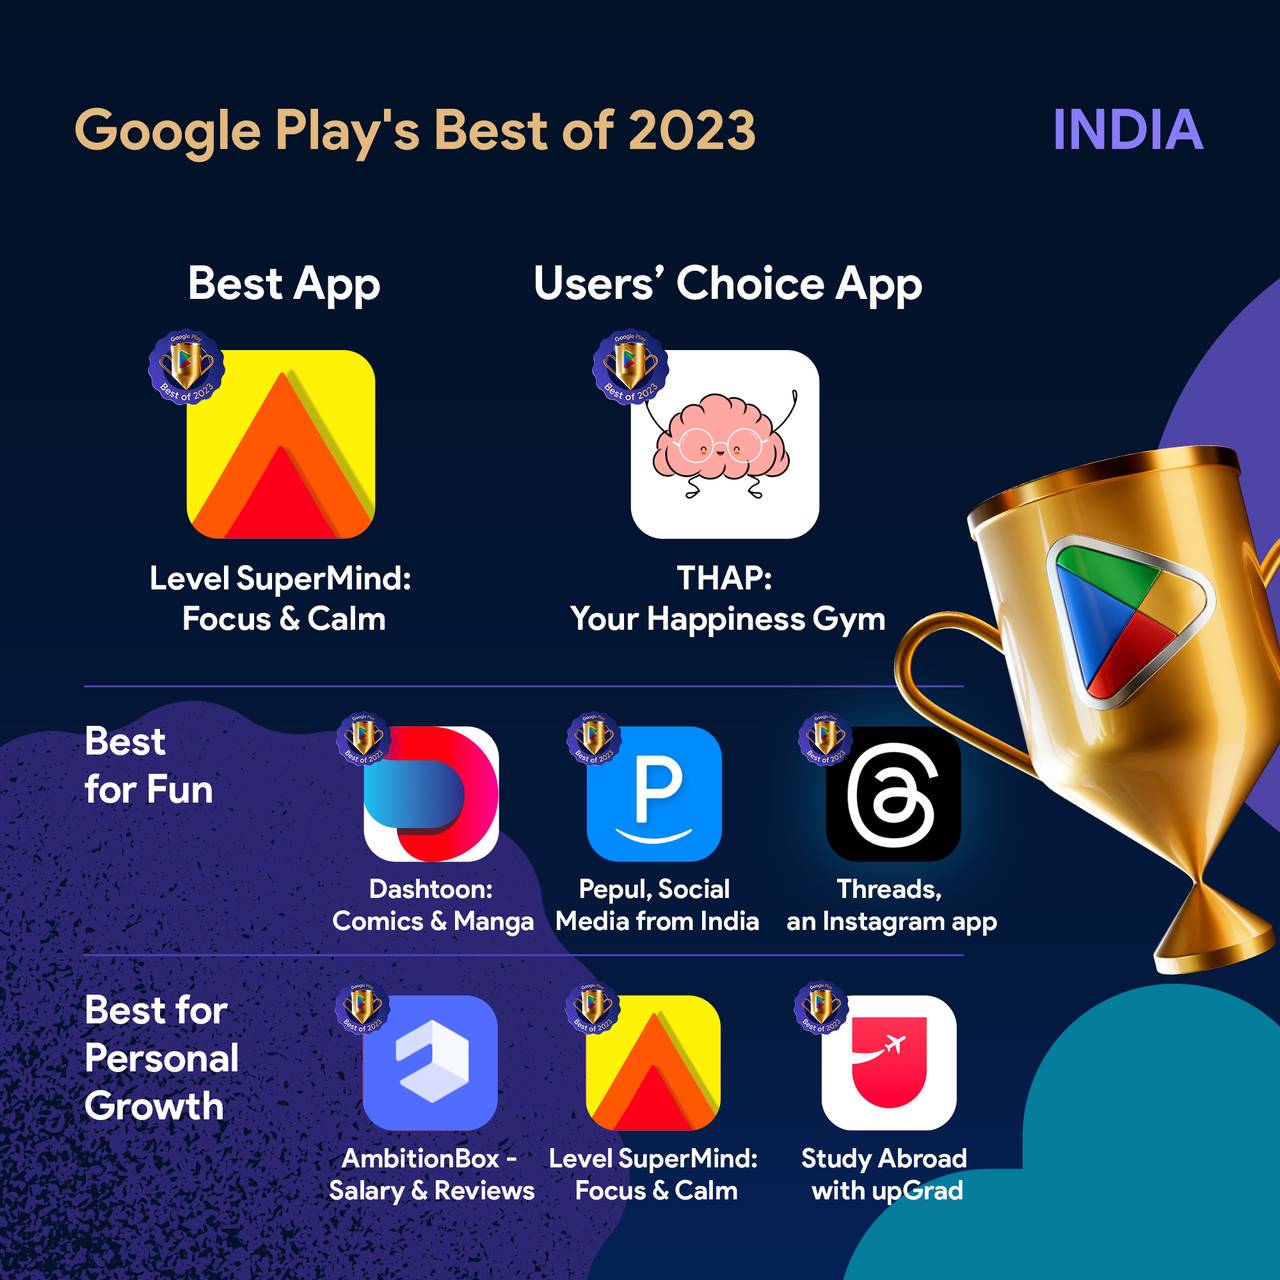 Google Play's list of best apps and games of 2023 is here